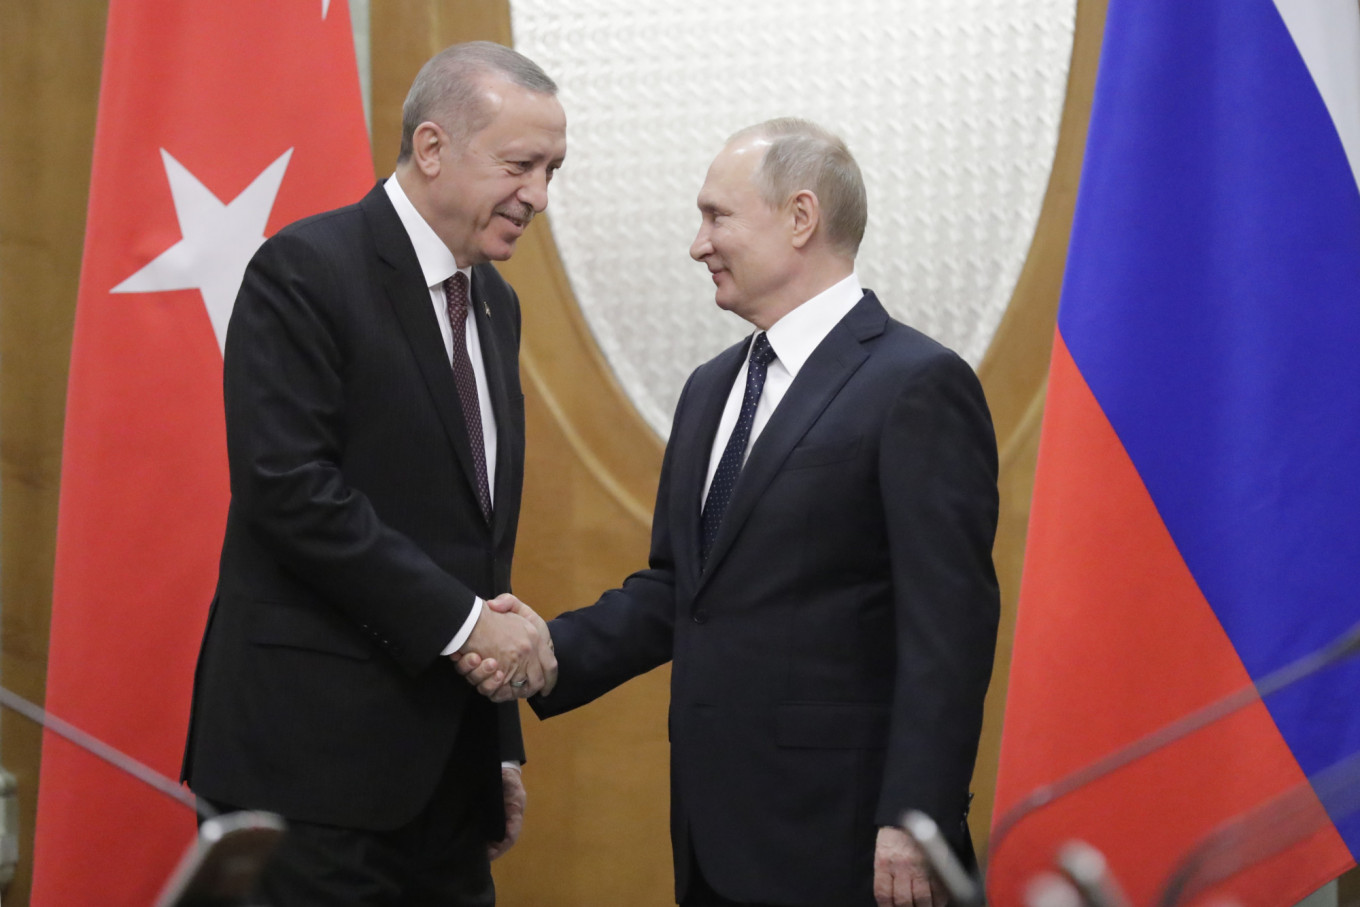 Turkey and U.S. Head for Showdown Over Russian Missile Contracts